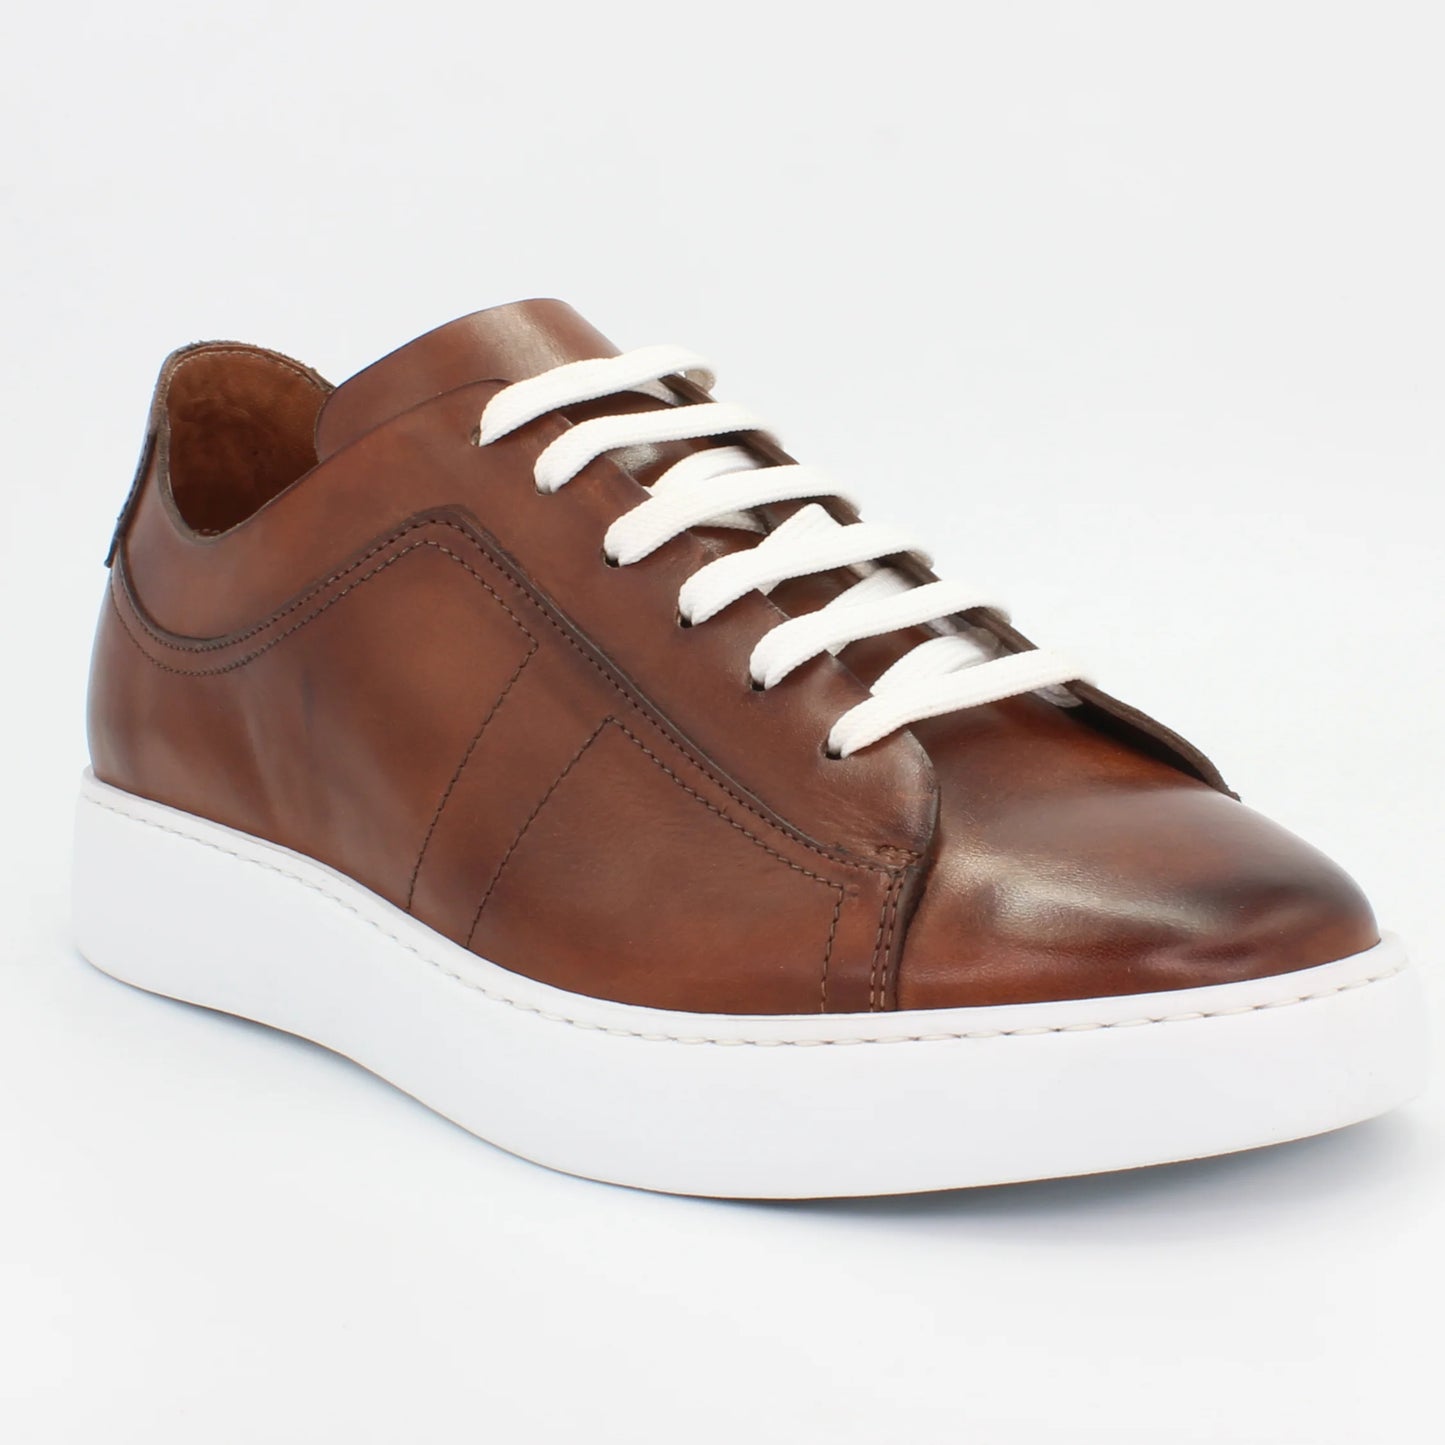 Shop Handmade Italian Leather sneaker in brandy (BRU11356) or browse our range of hand-made Italian shoes for men in leather or suede in-store at Aliverti Cape Town, or shop online. We deliver in South Africa & offer multiple payment plans as well as accept multiple safe & secure payment methods.